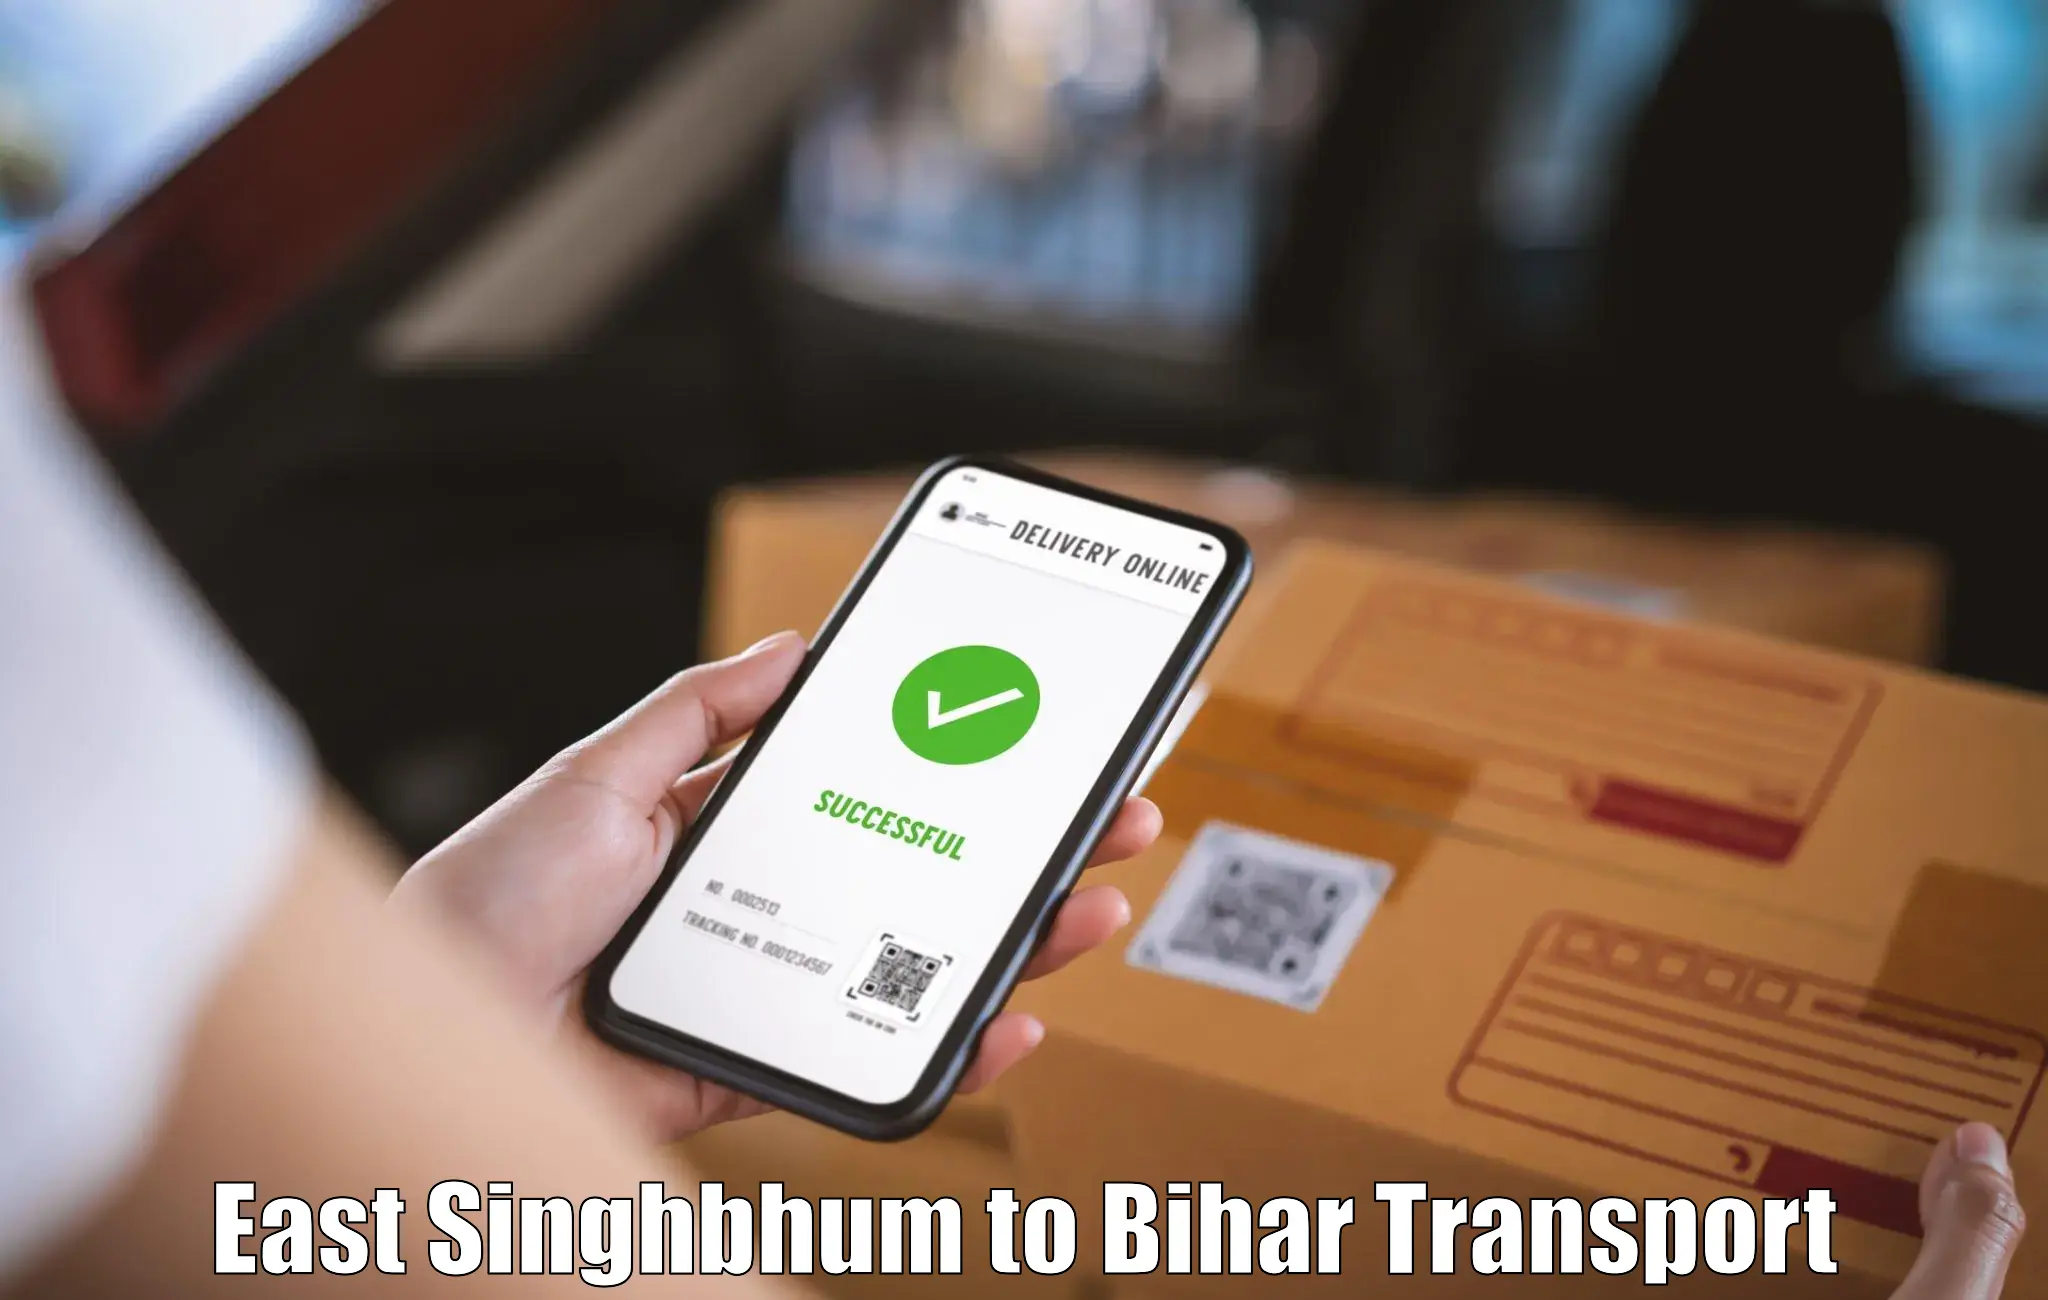 Online transport service East Singhbhum to Chakia